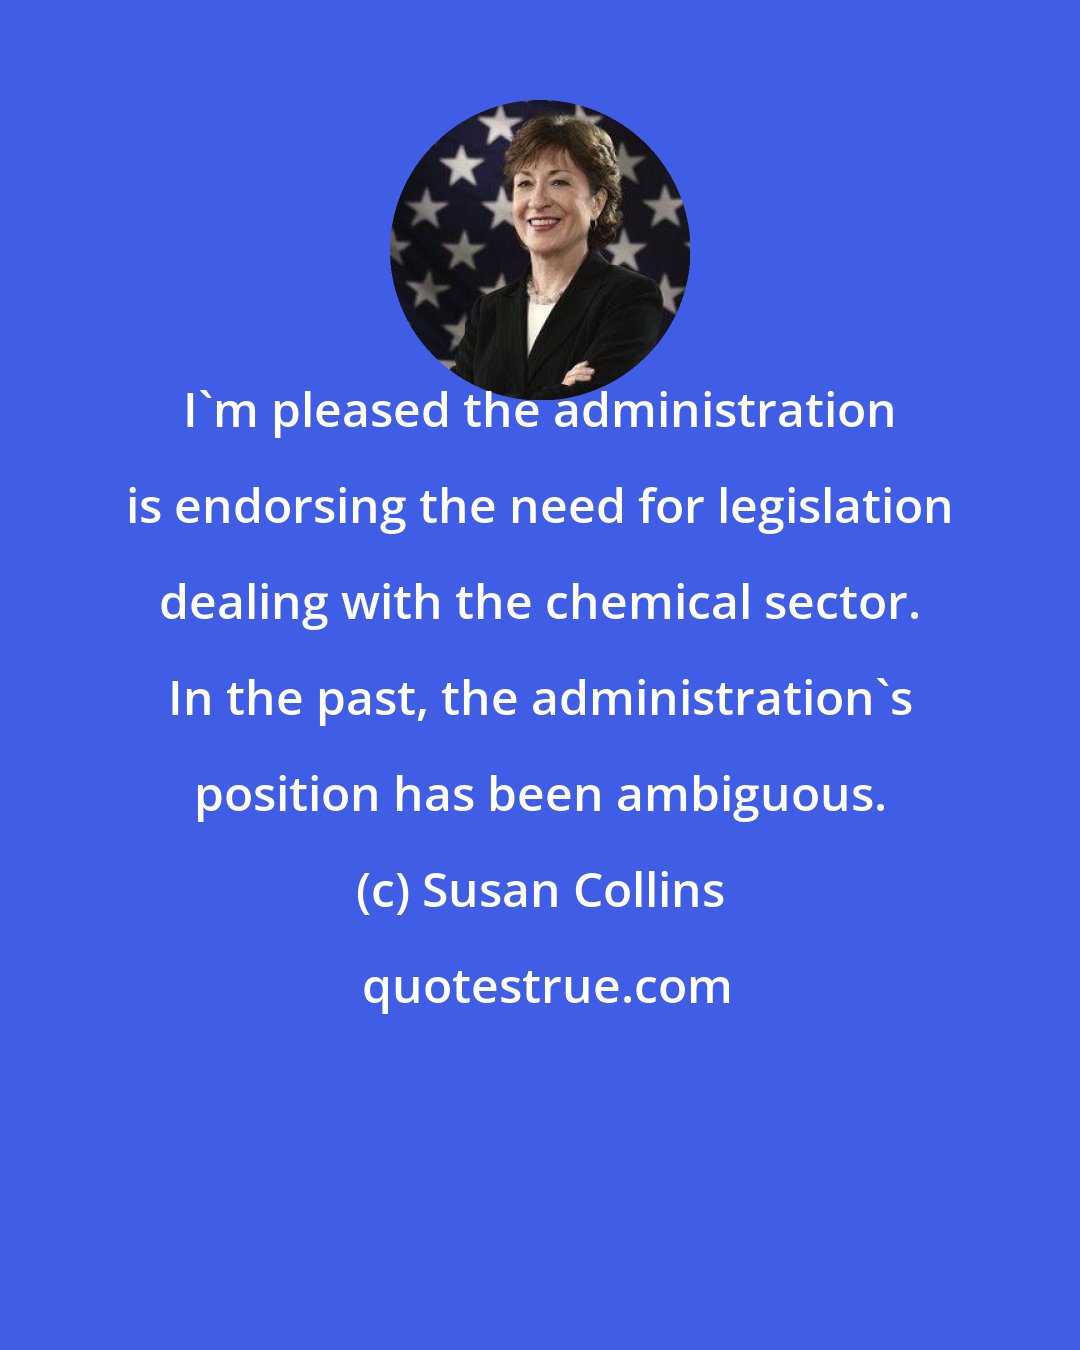 Susan Collins: I'm pleased the administration is endorsing the need for legislation dealing with the chemical sector. In the past, the administration's position has been ambiguous.